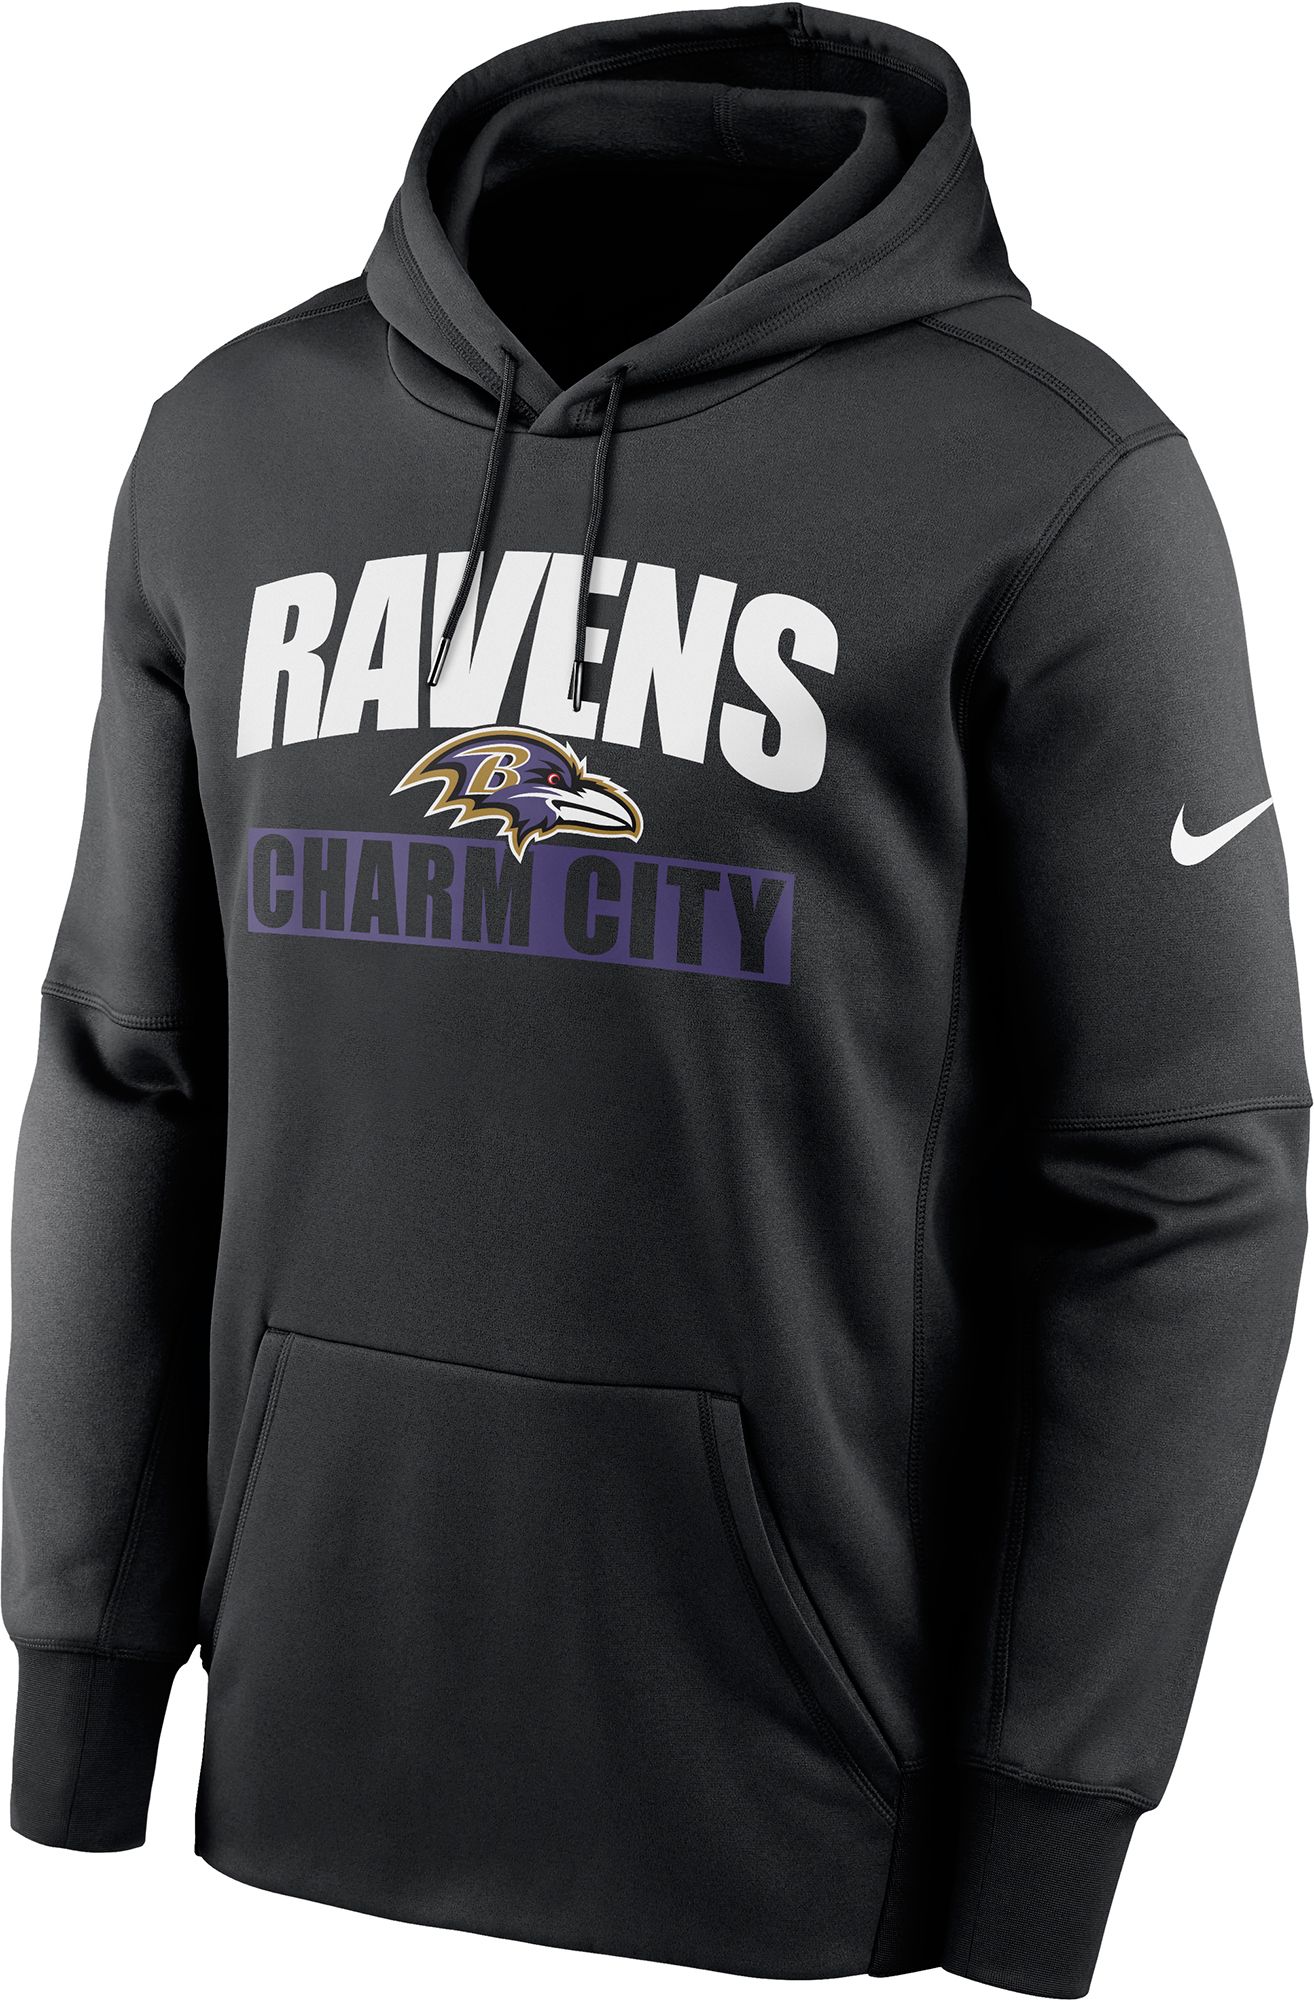 Men's NWT NIKE Therma-Fit NFL BALTIMORE RAVENS On Field Black